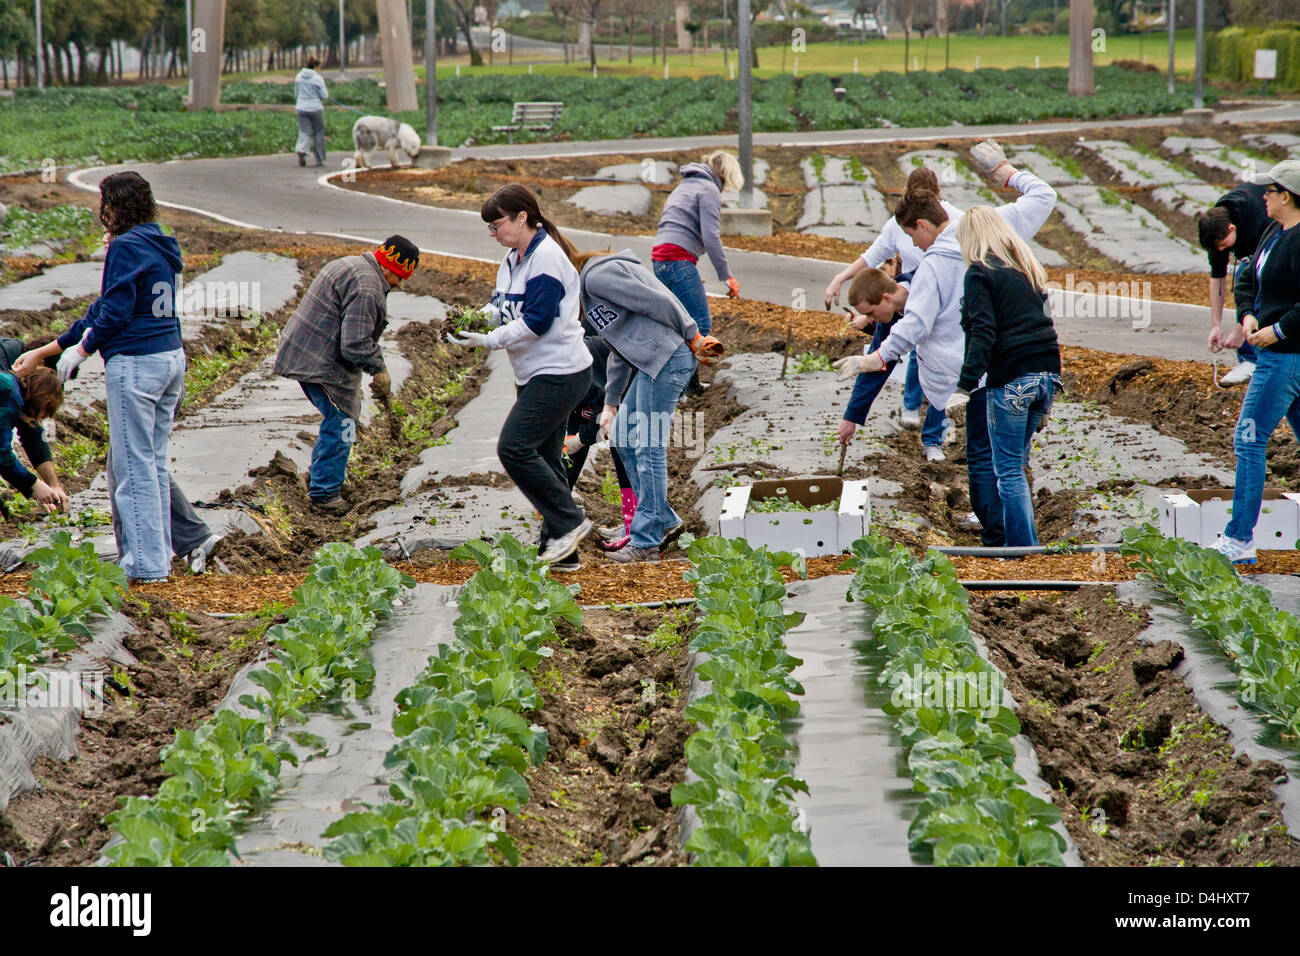 Charitable volunteers plant spinach in a muddy field in Irvine, CA, to be grown to feed the homeless. Stock Photo